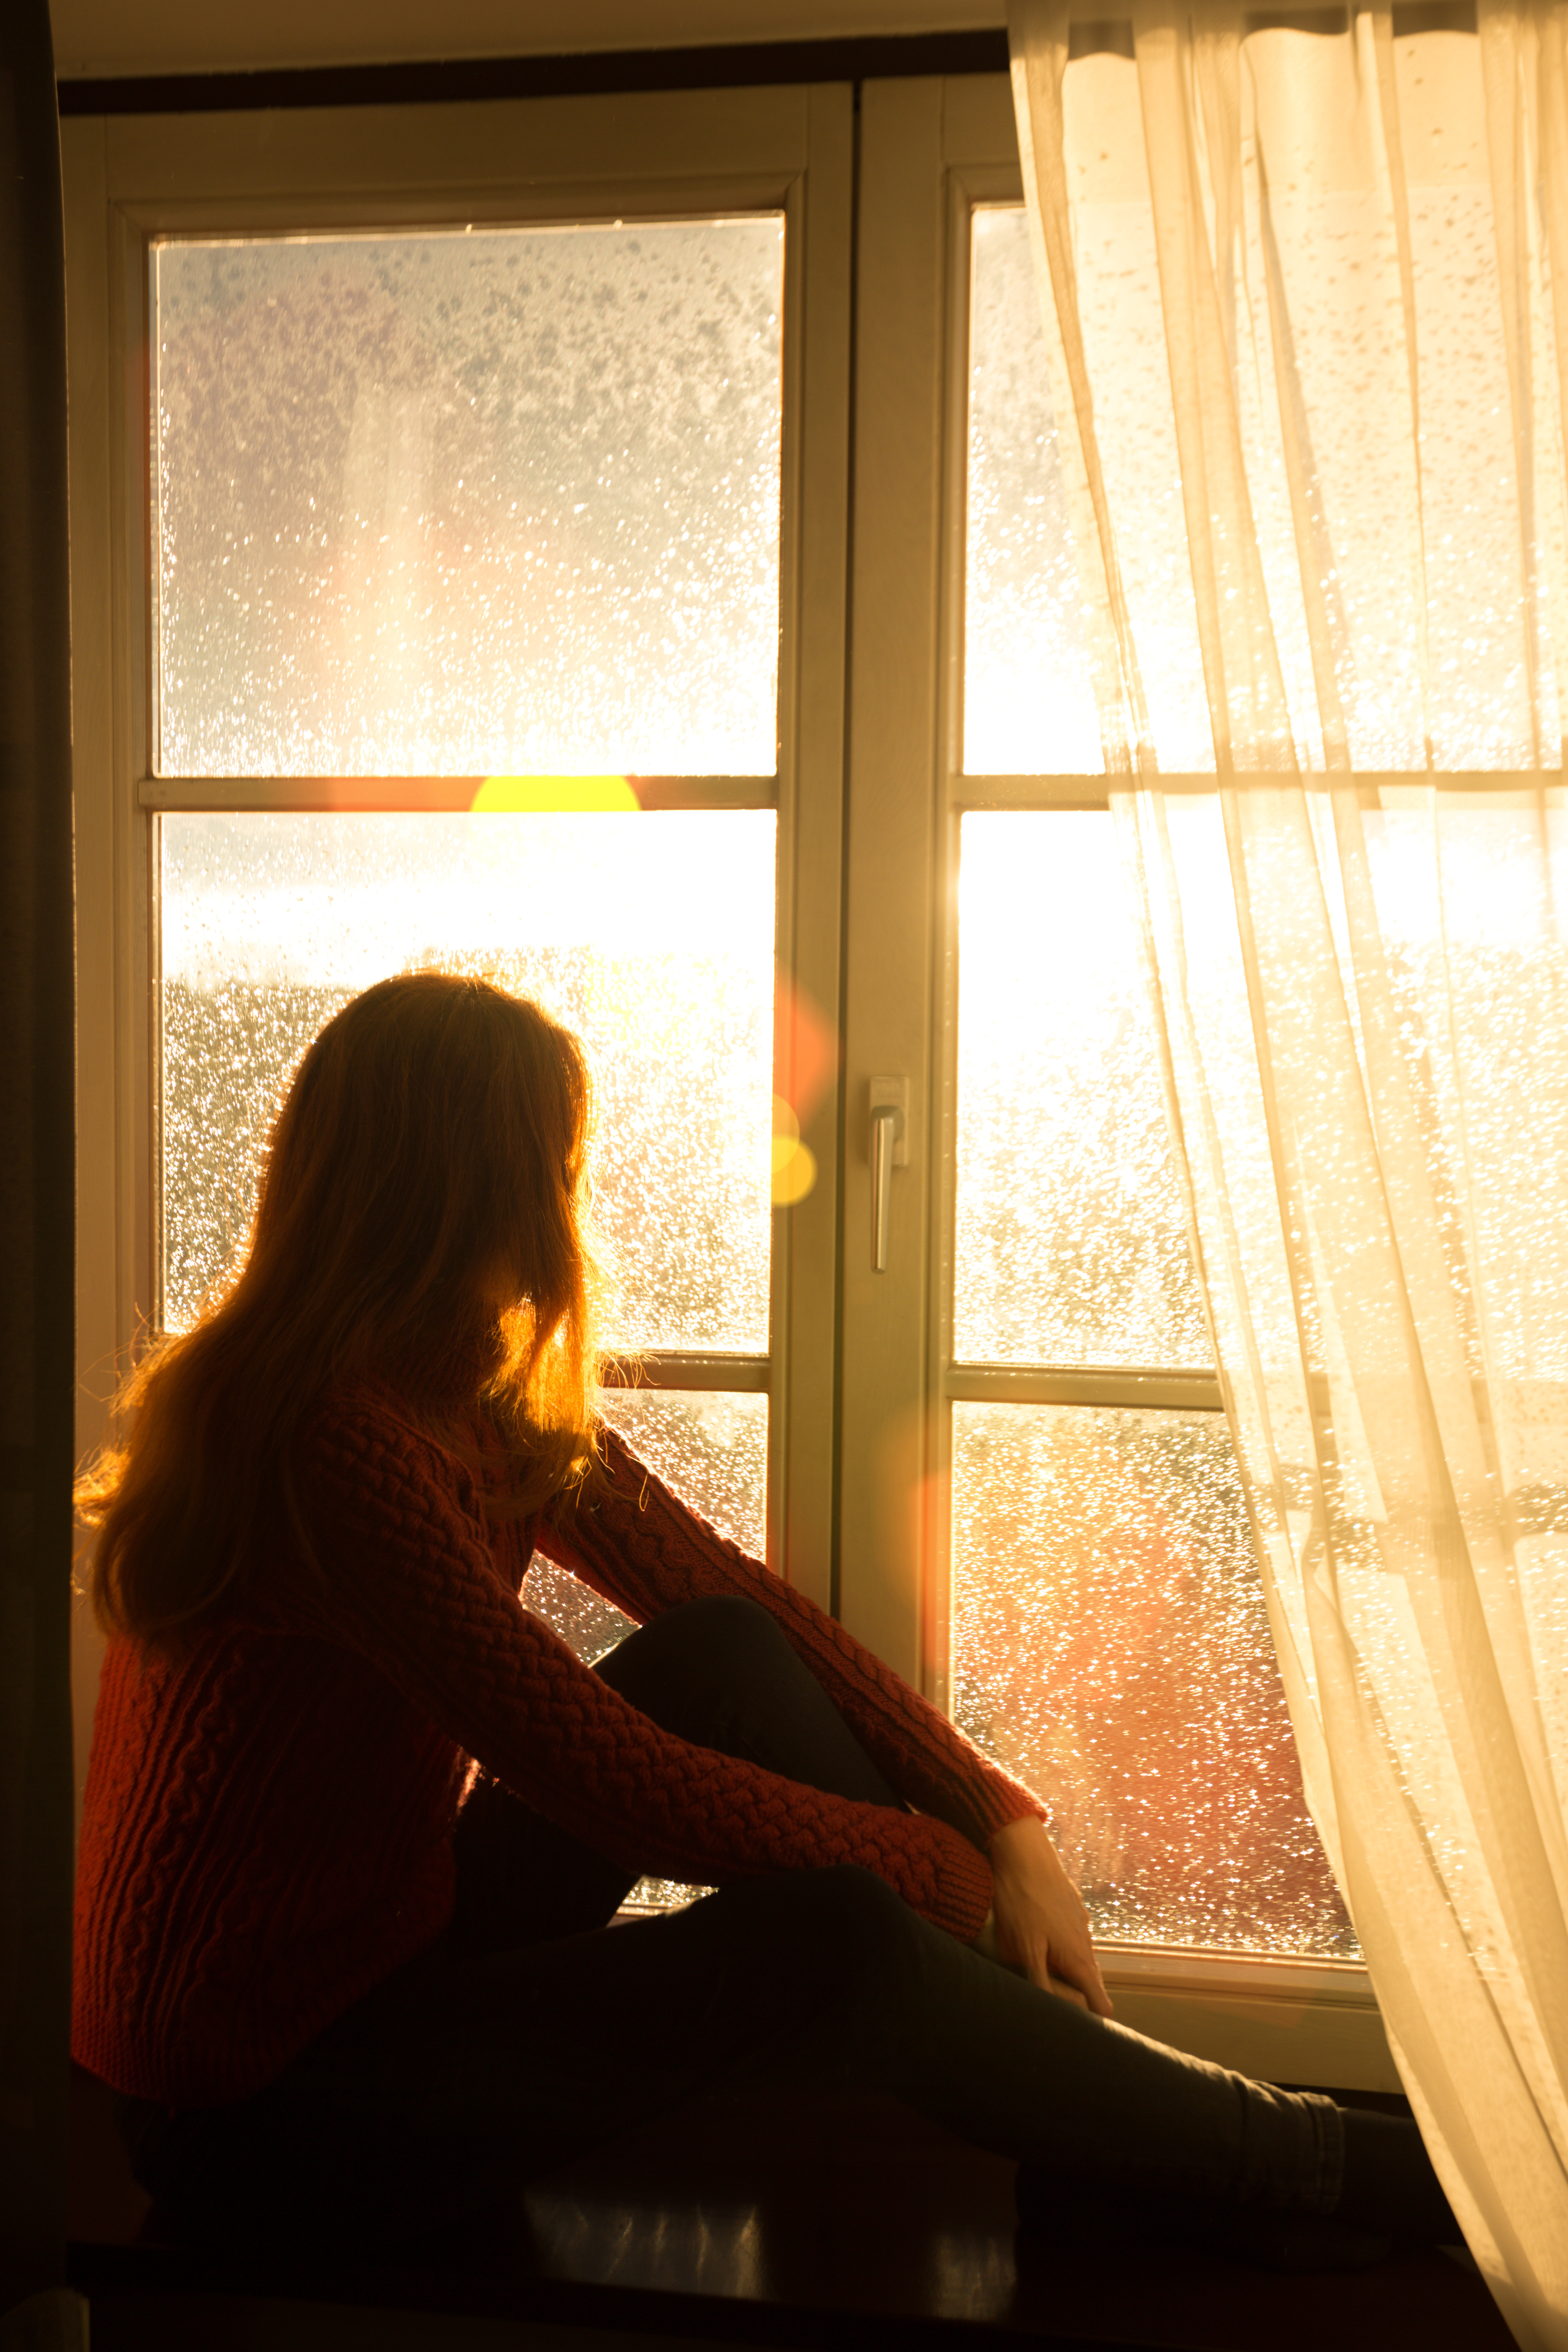 A woman sitting by her window - find Littleton multiple sclerosis treatment today with Light Lounge.